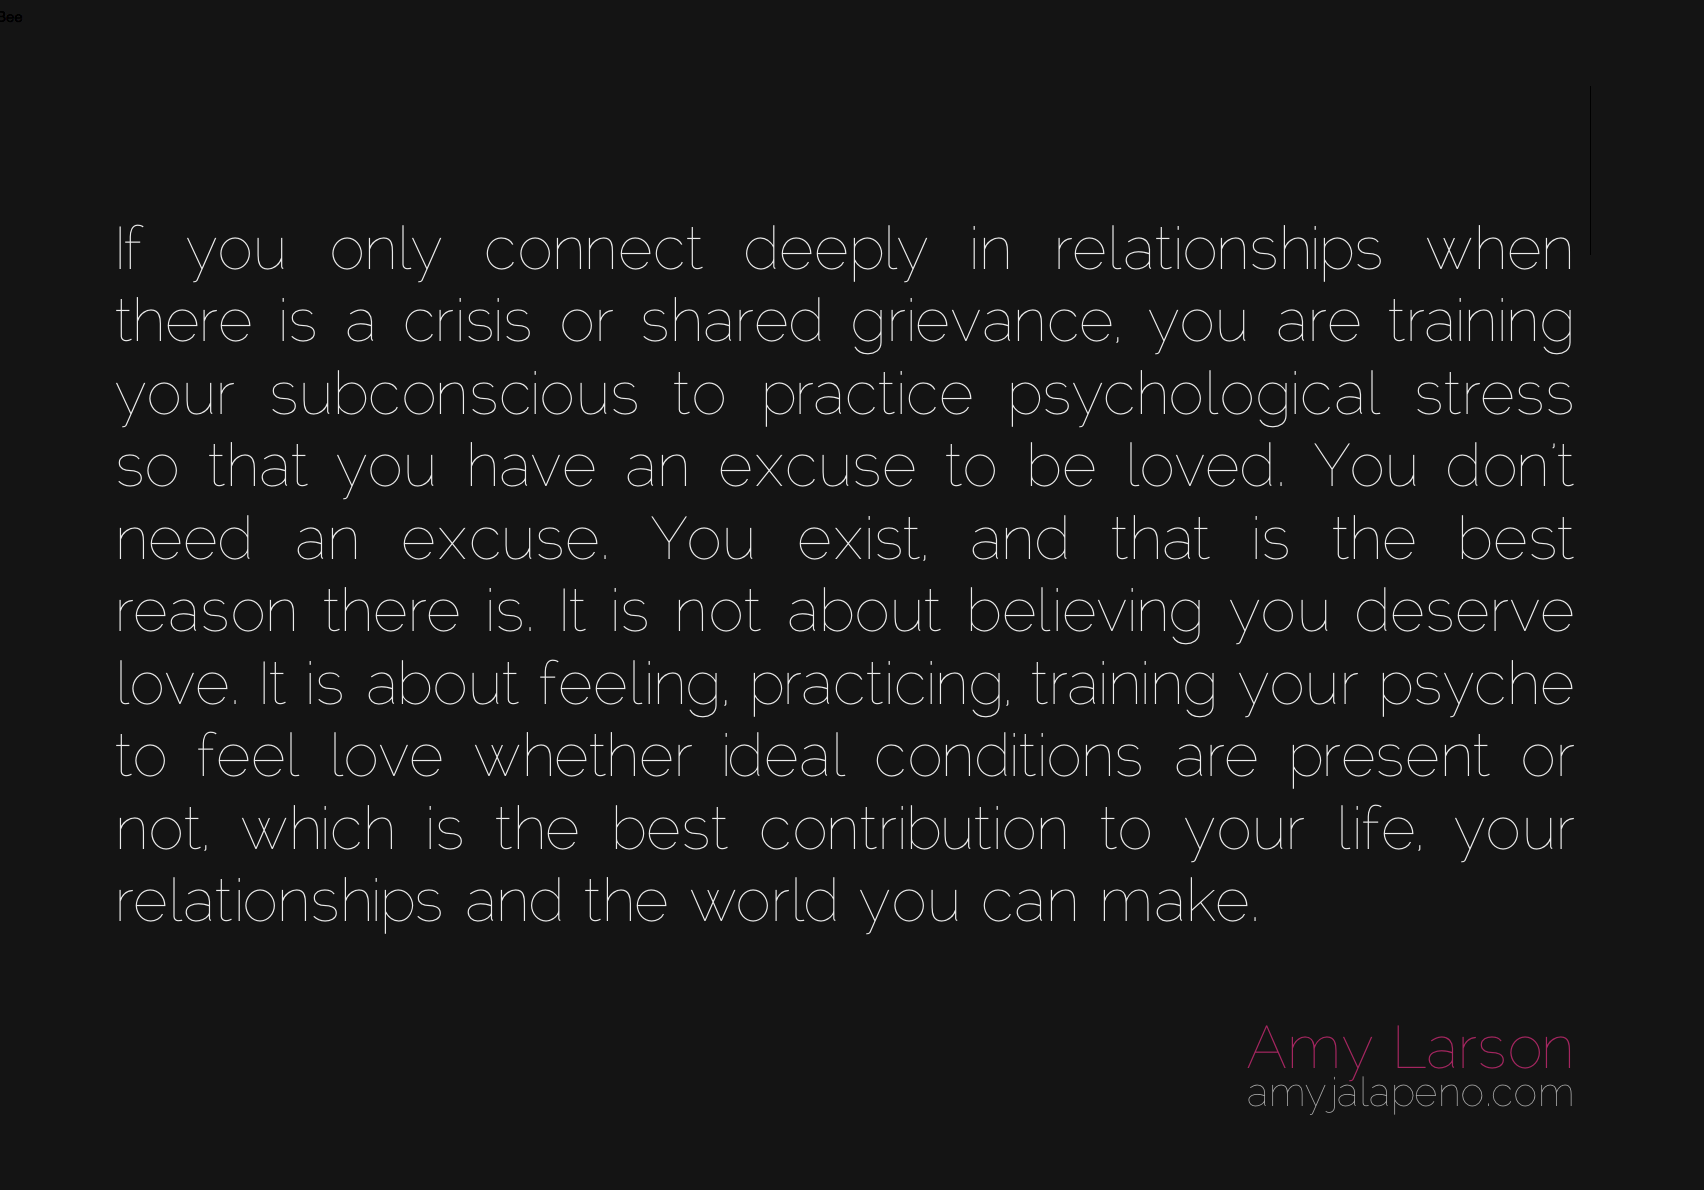 relationships connection love crisis grievance practice habit conditioning “If you